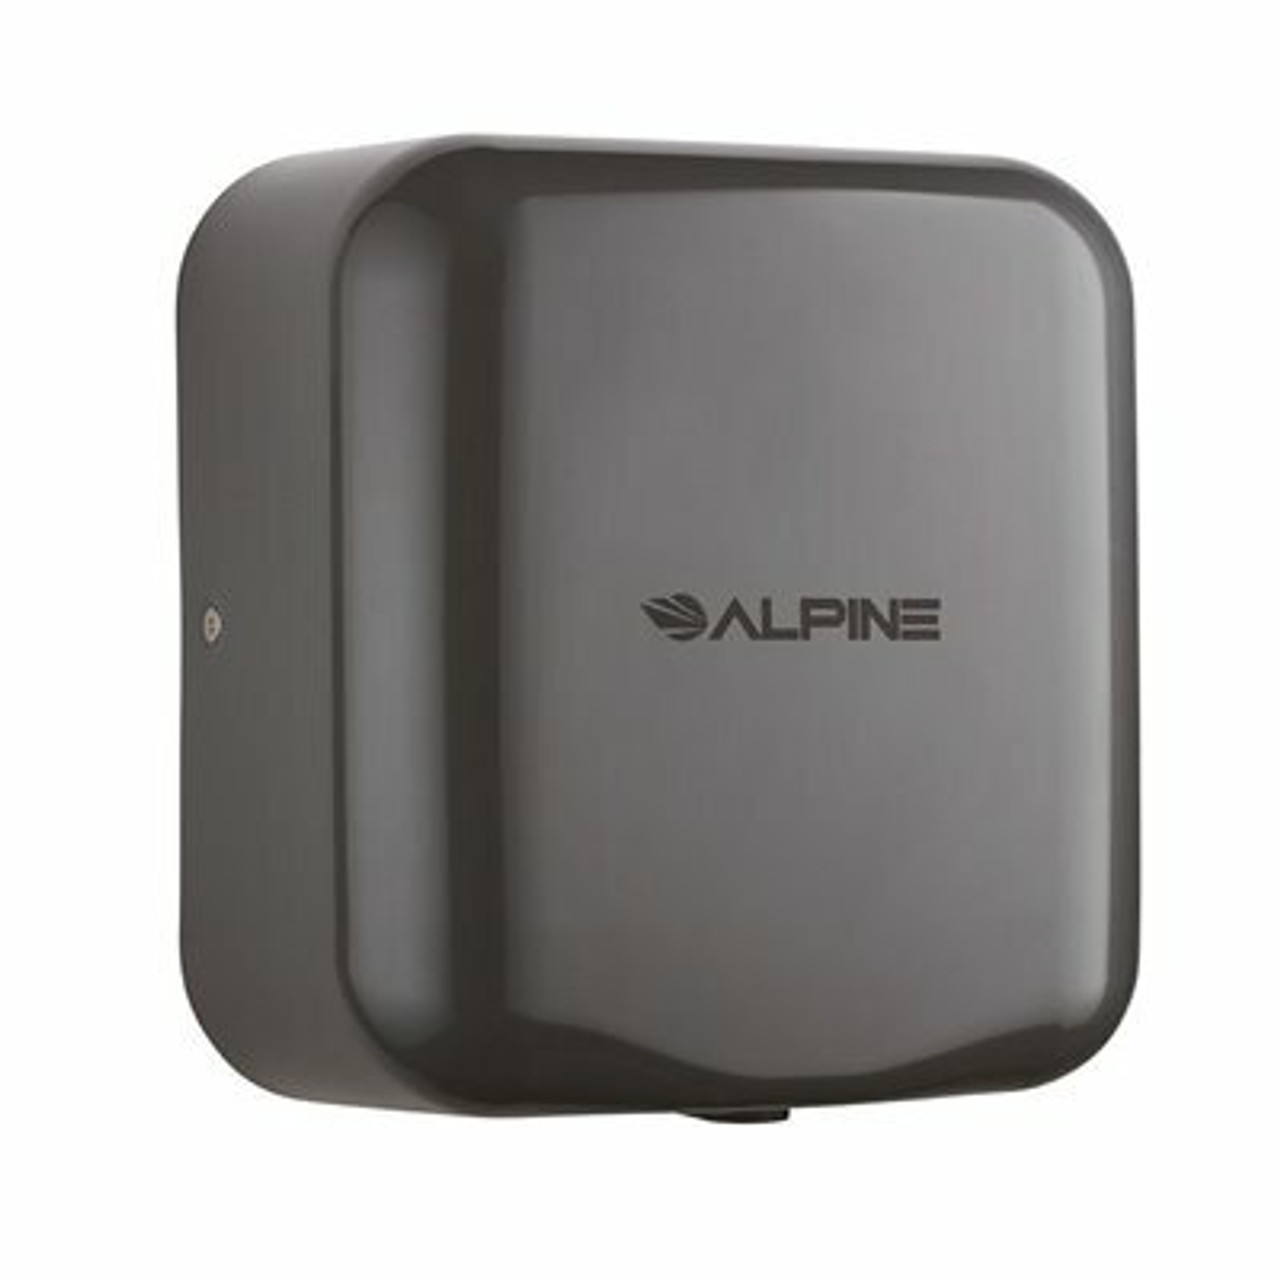 Alpine Industries Hemlock Grey Commercial High Speed Stainless Steel Automatic Electric Hand Dryer